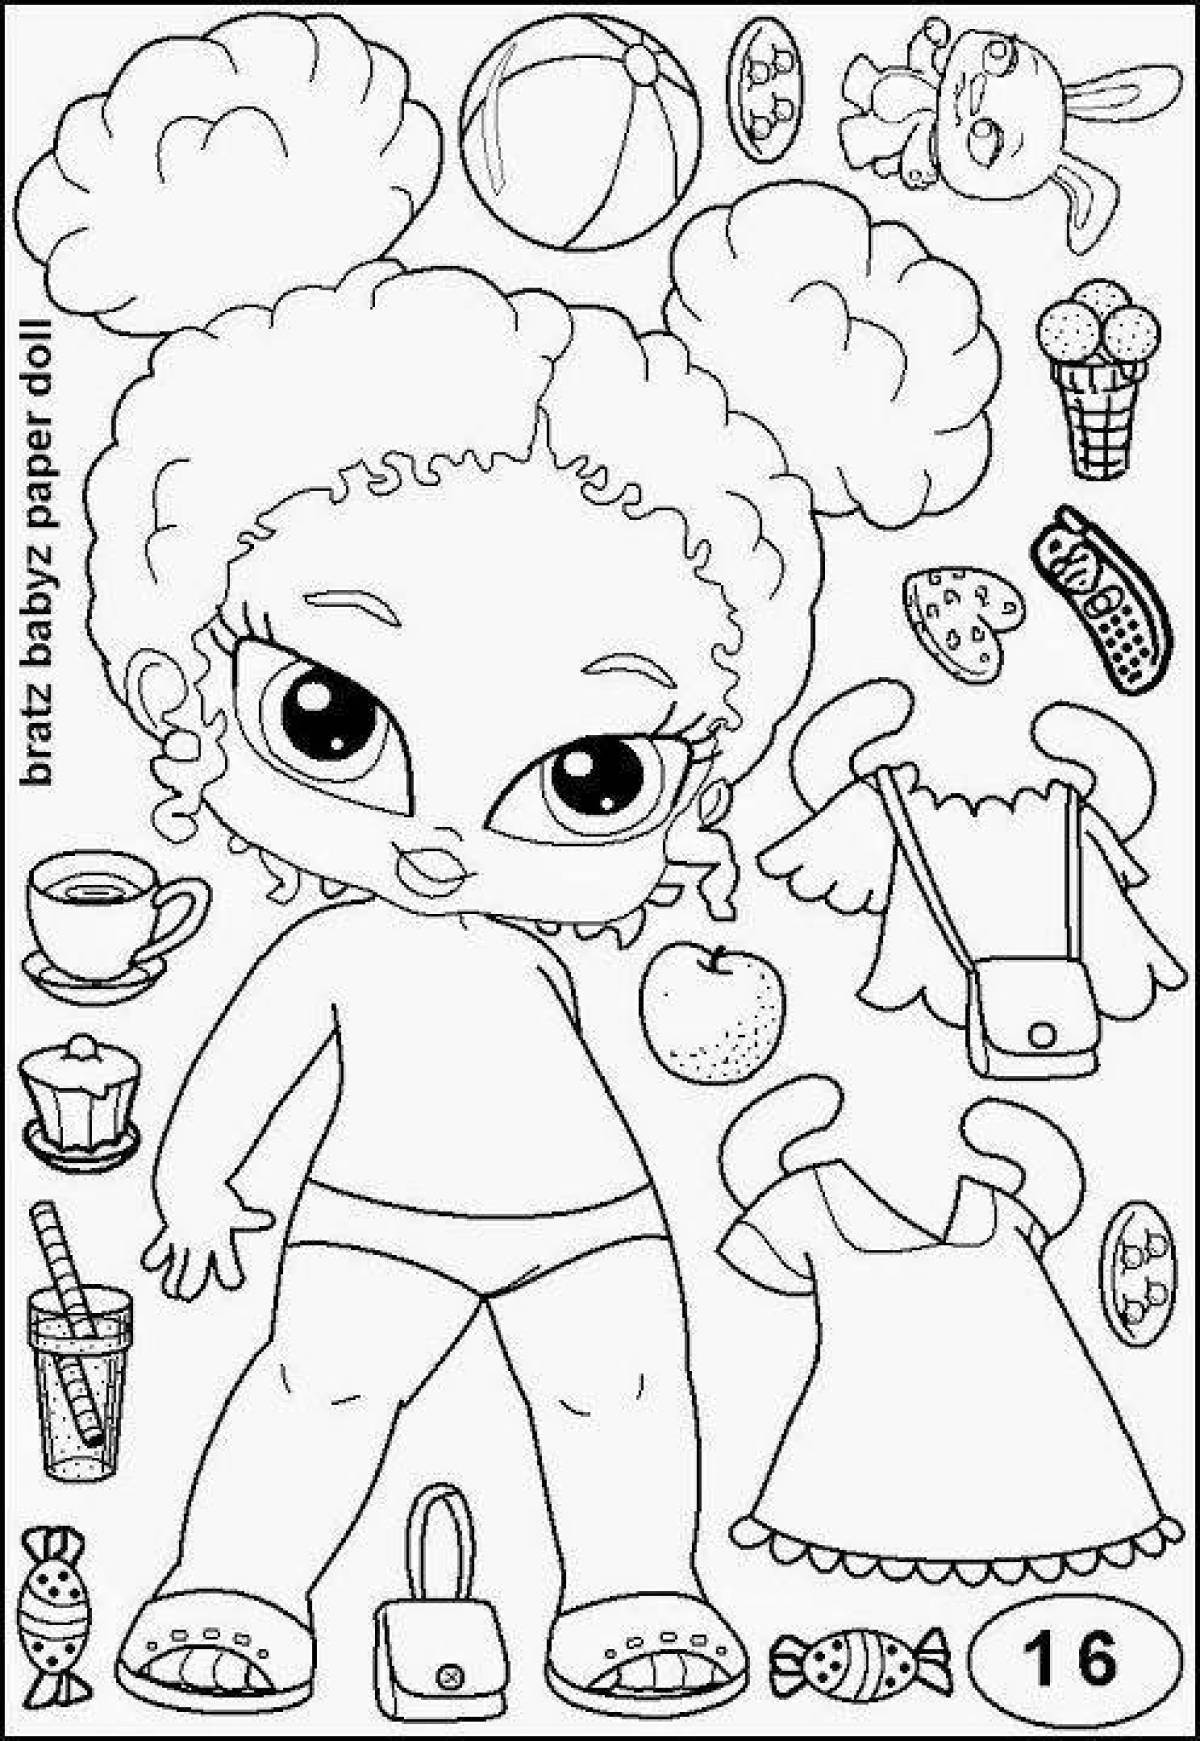 Amazing lol coloring book with clothes